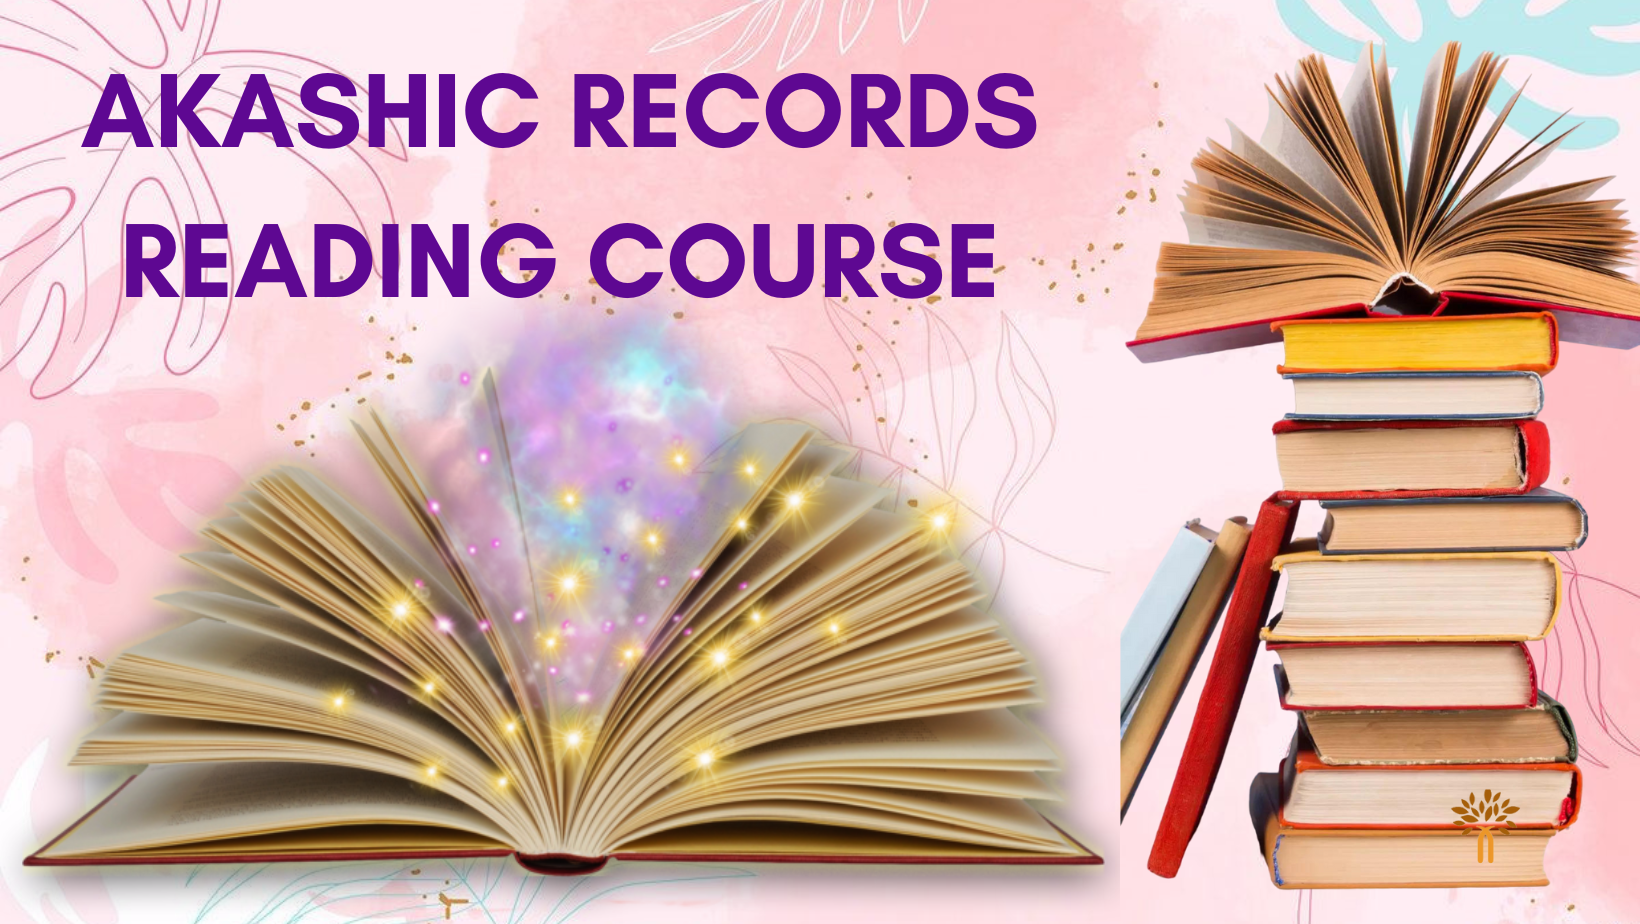 Akashic Records Reading Course in Bangalore